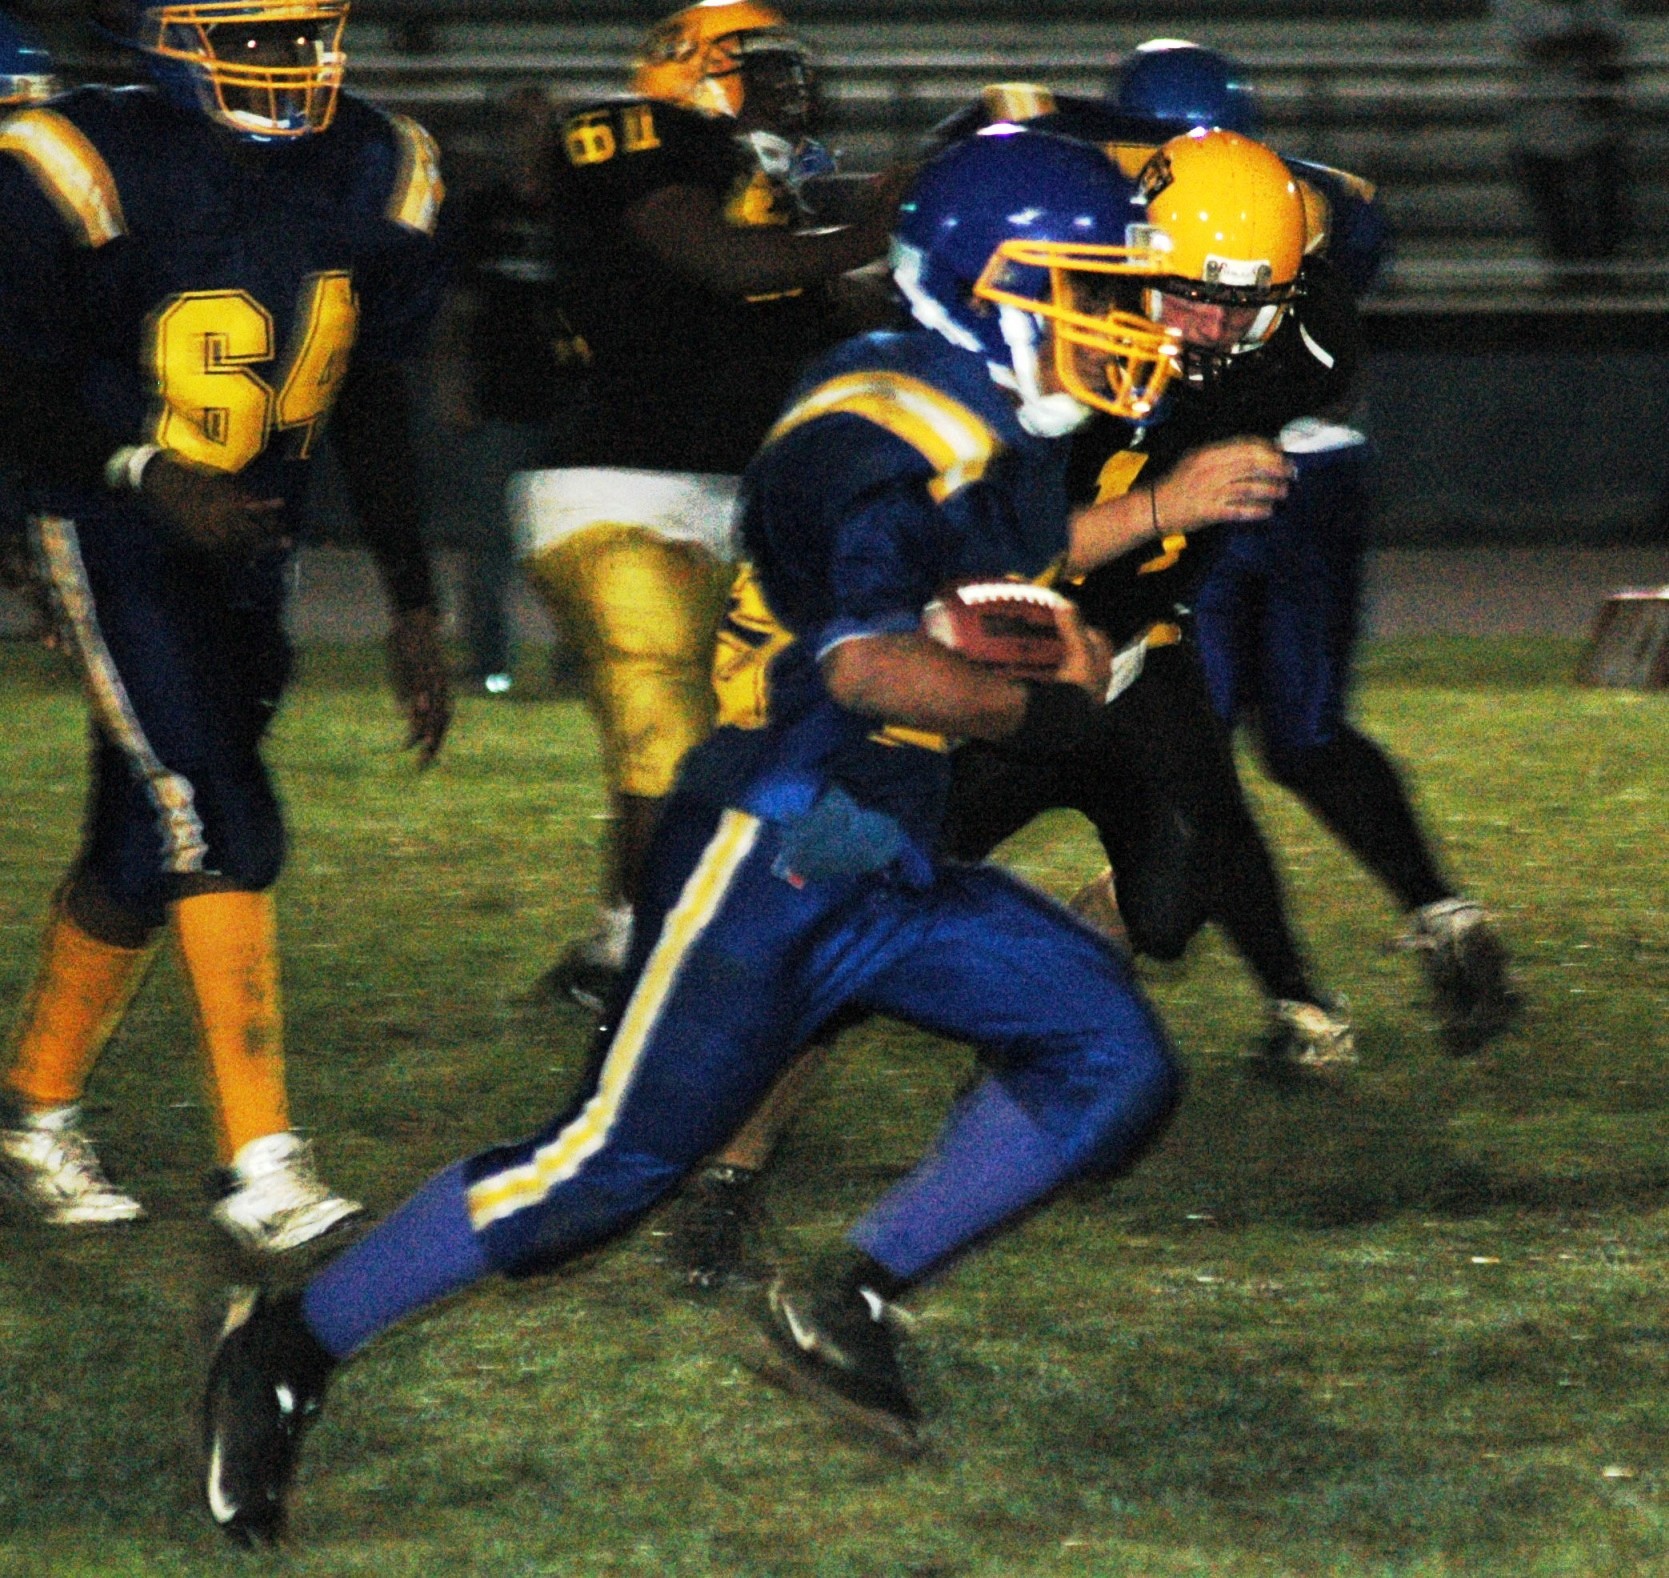 Hawks running back Omar Fernandez rushed for two touchdowns.